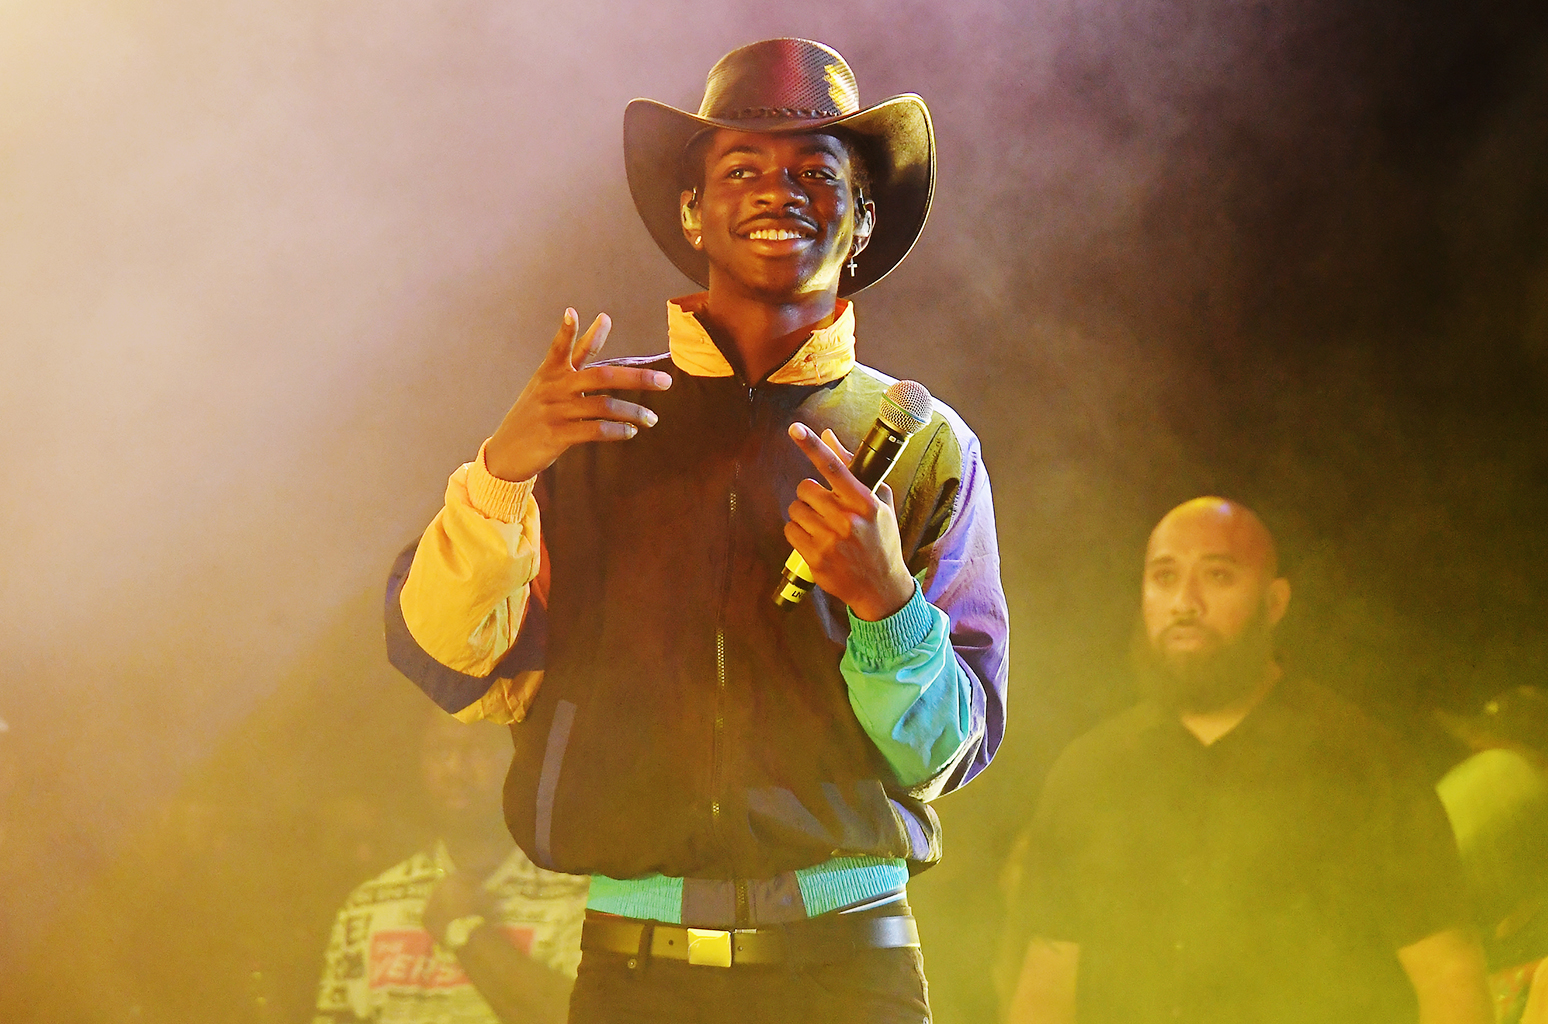 Lil Nas X Releases 'Panini' Ahead of New EP '7': Listen